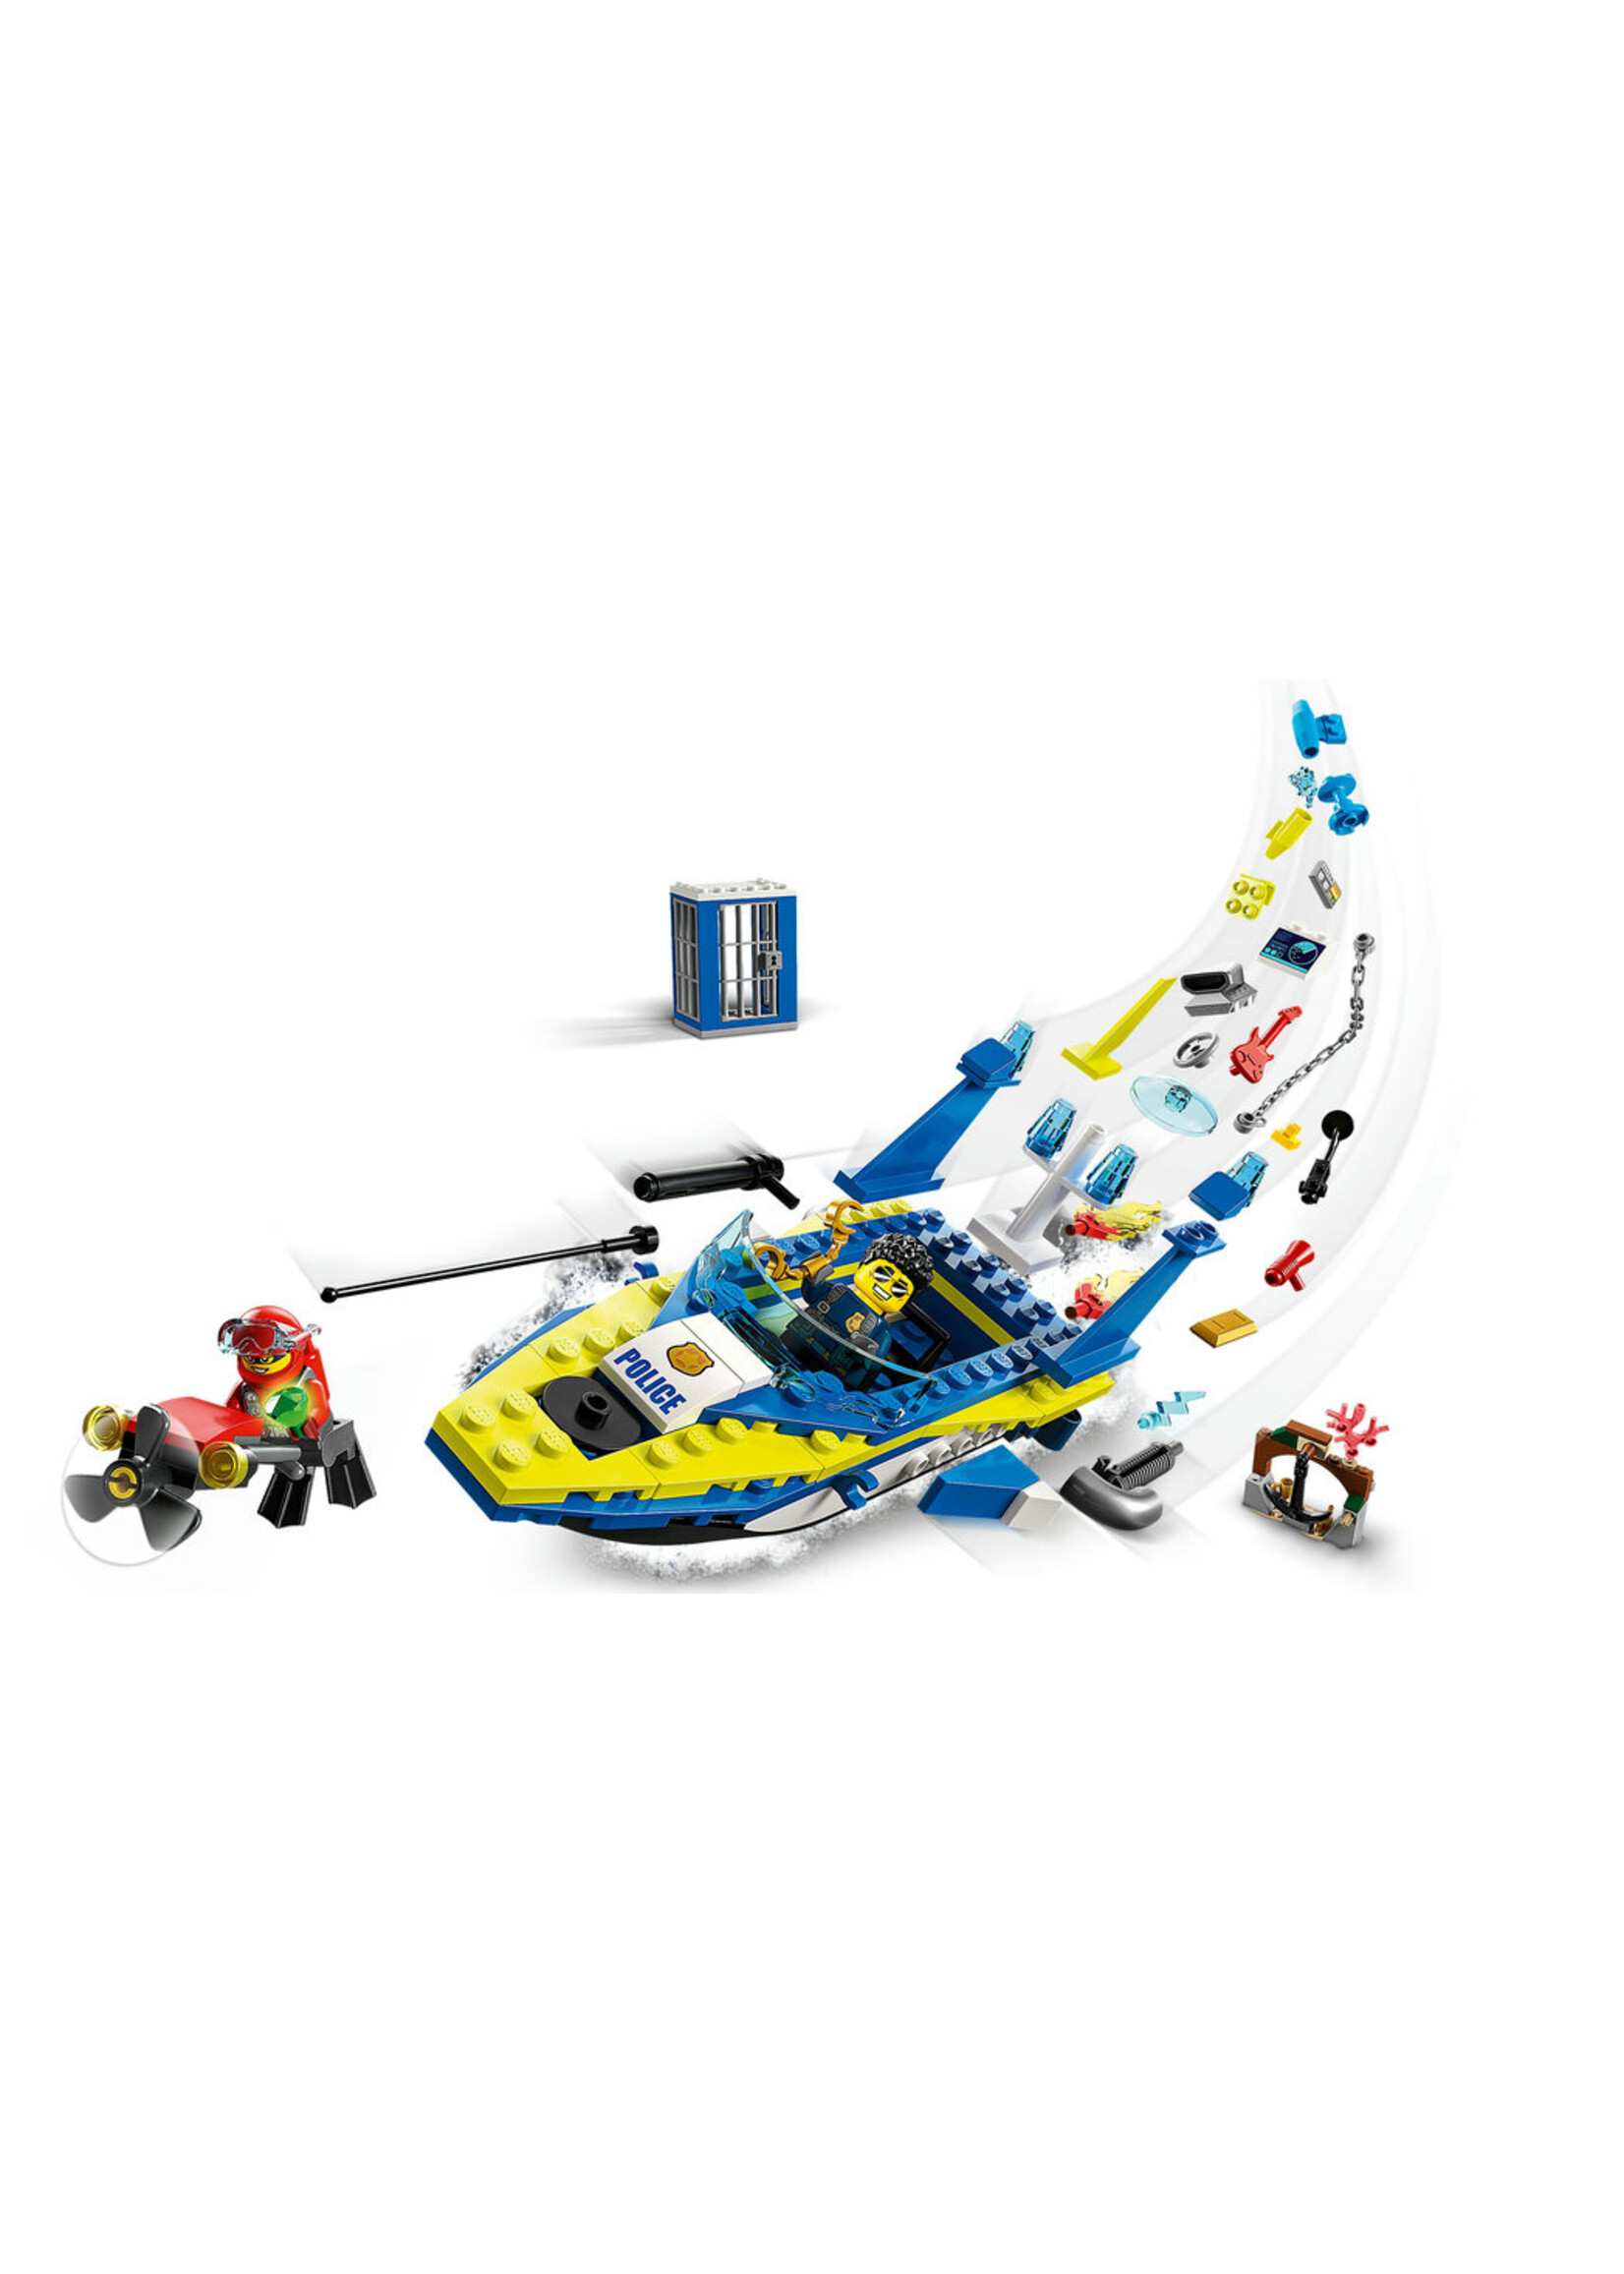 LEGO 60355 - Water Police Detective Missions